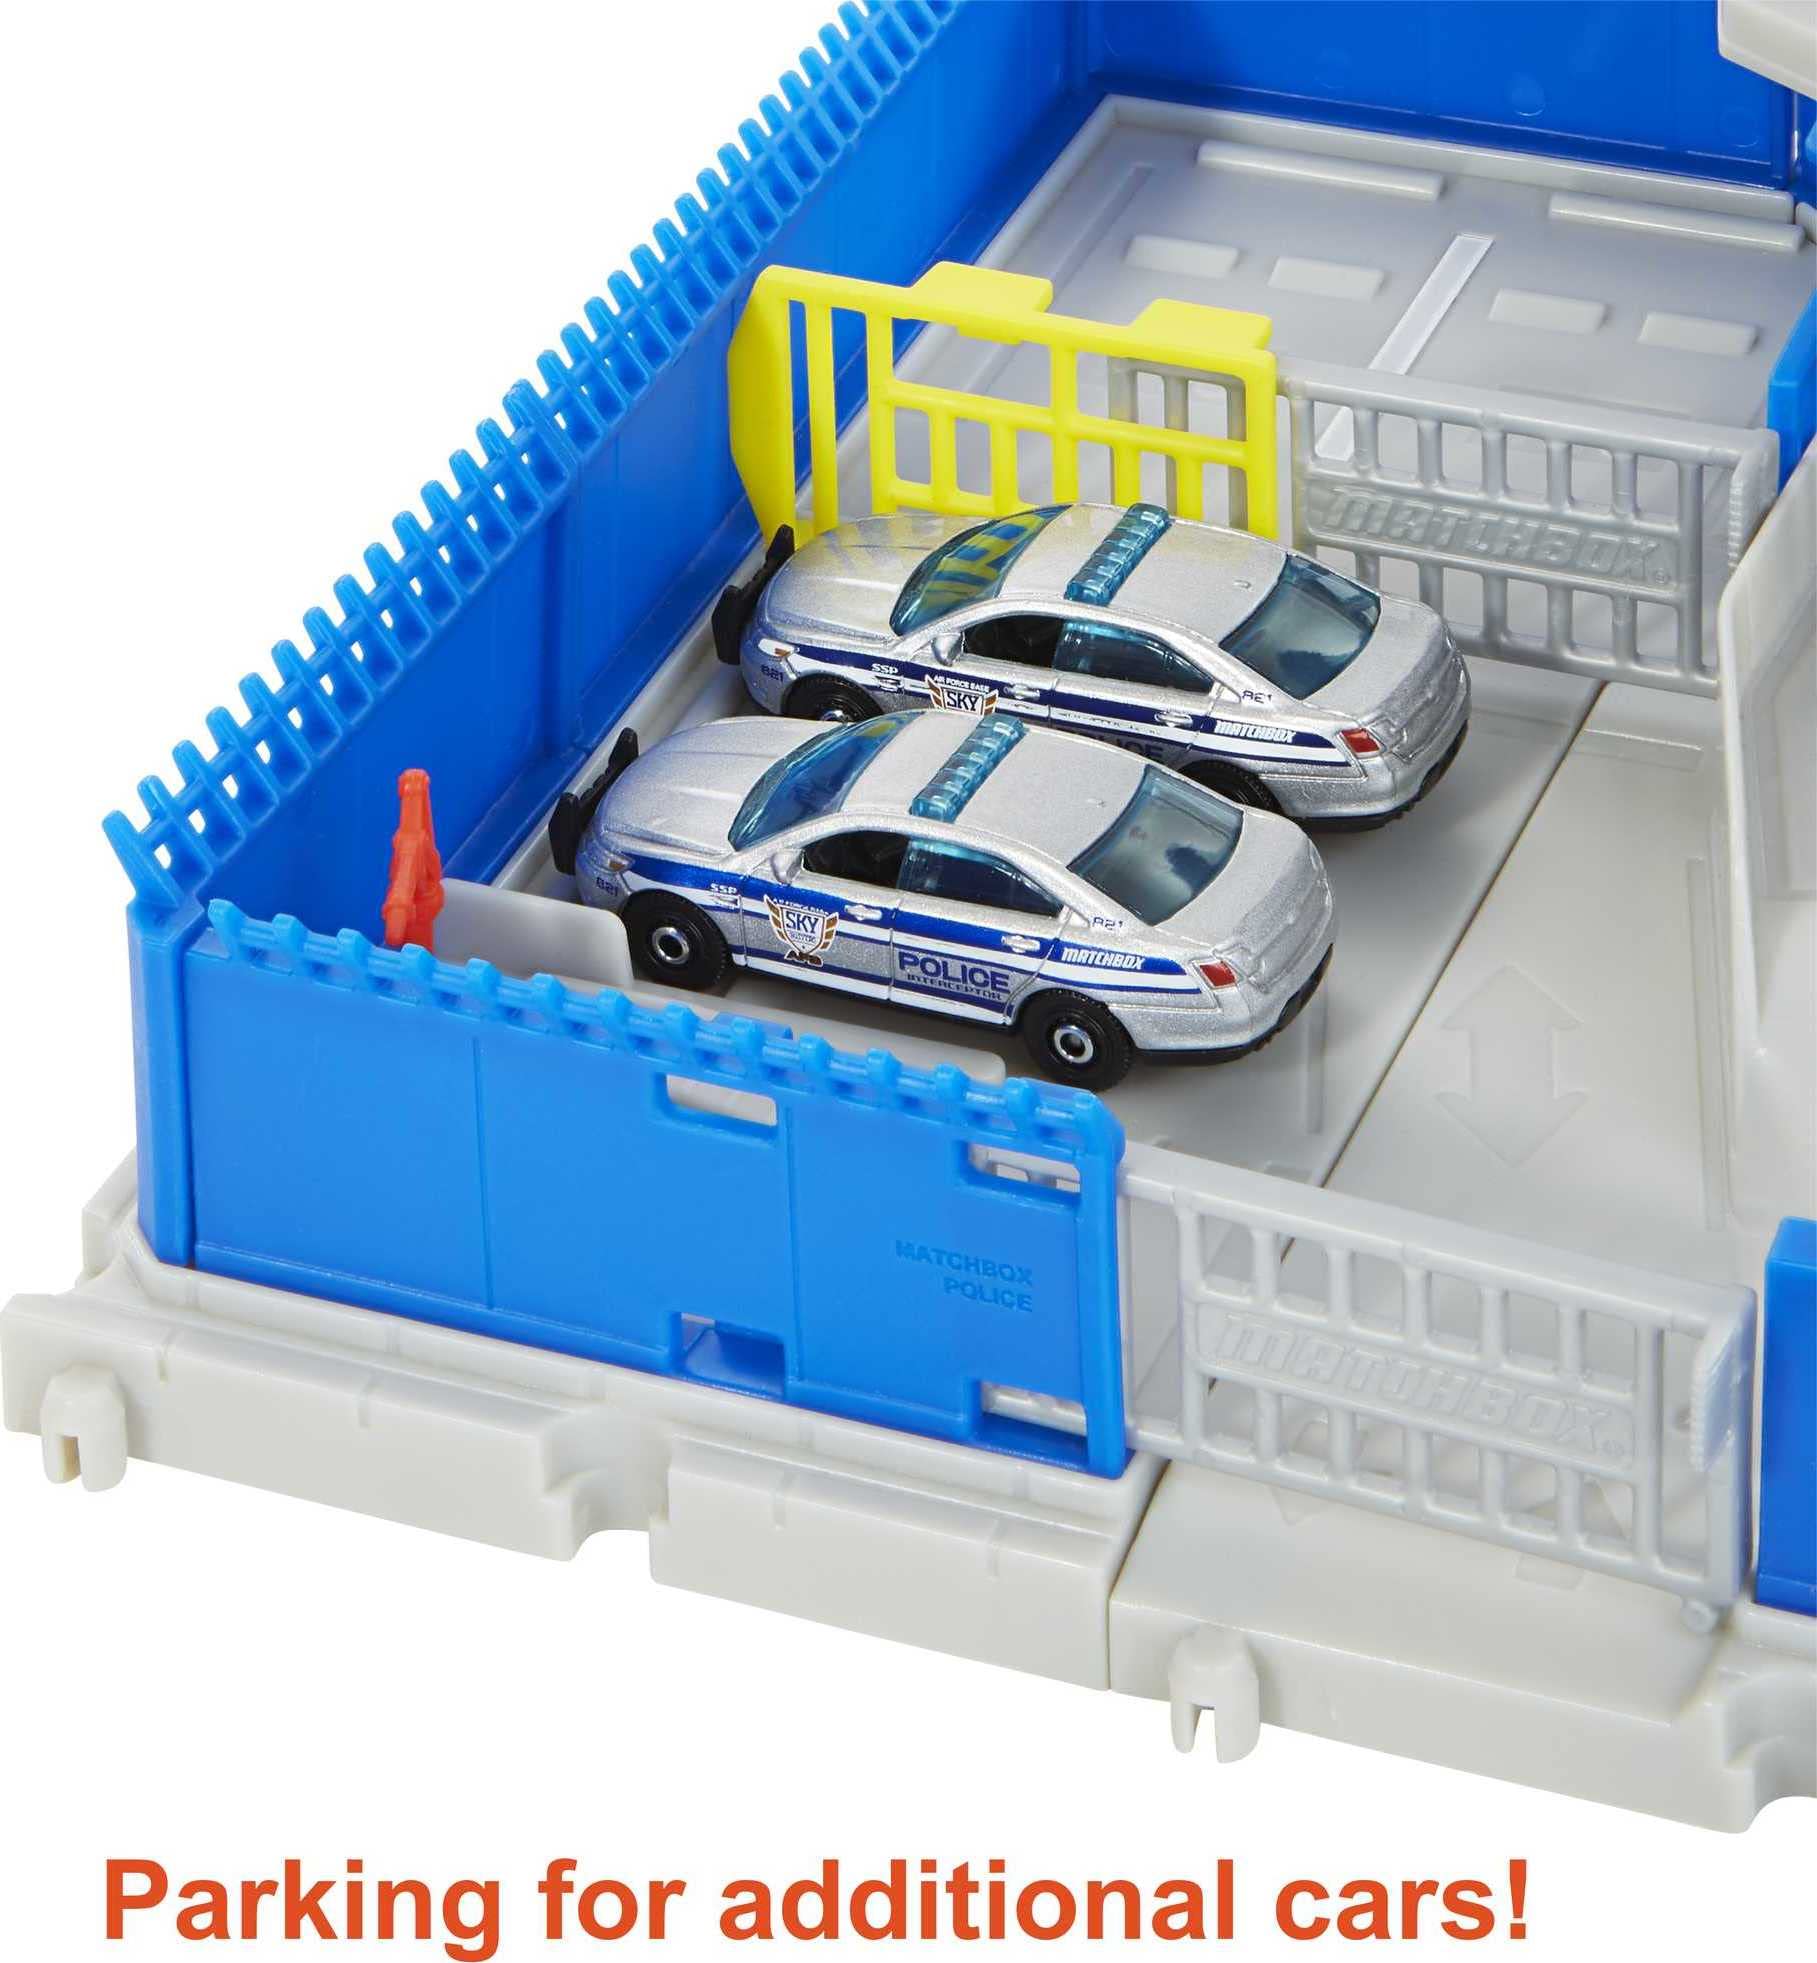 Matchbox Action Drivers Police Station Dispatch Playset with 1 Helicopter & 1 Ford Police Car, with Lights & Sounds